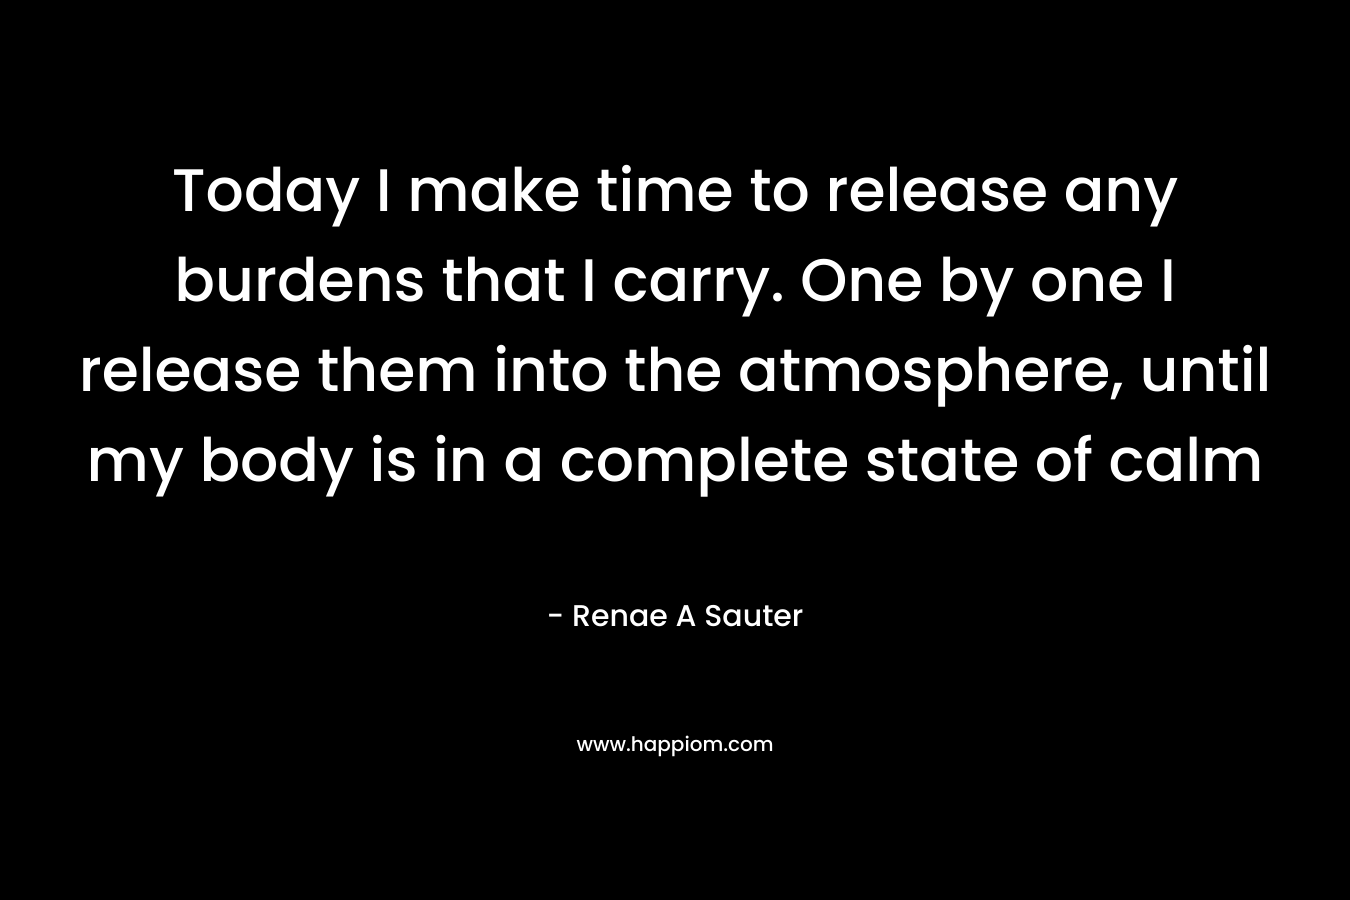 Today I make time to release any burdens that I carry. One by one I release them into the atmosphere, until my body is in a complete state of calm